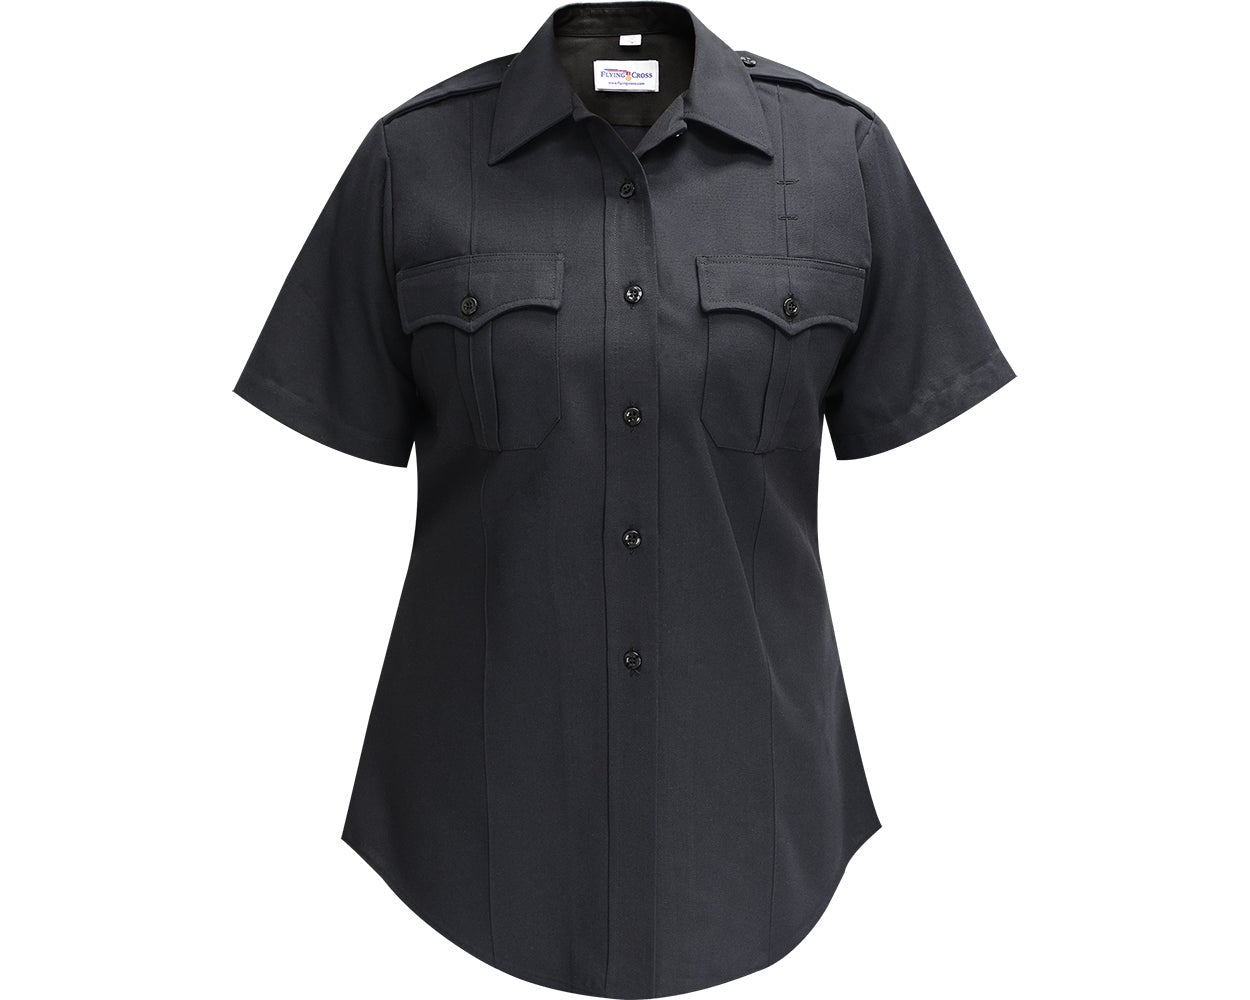 Flying Cross Deluxe Tropical Women's Short Sleeve Shirt with Traditional Collar 154R66 - Clothing & Accessories